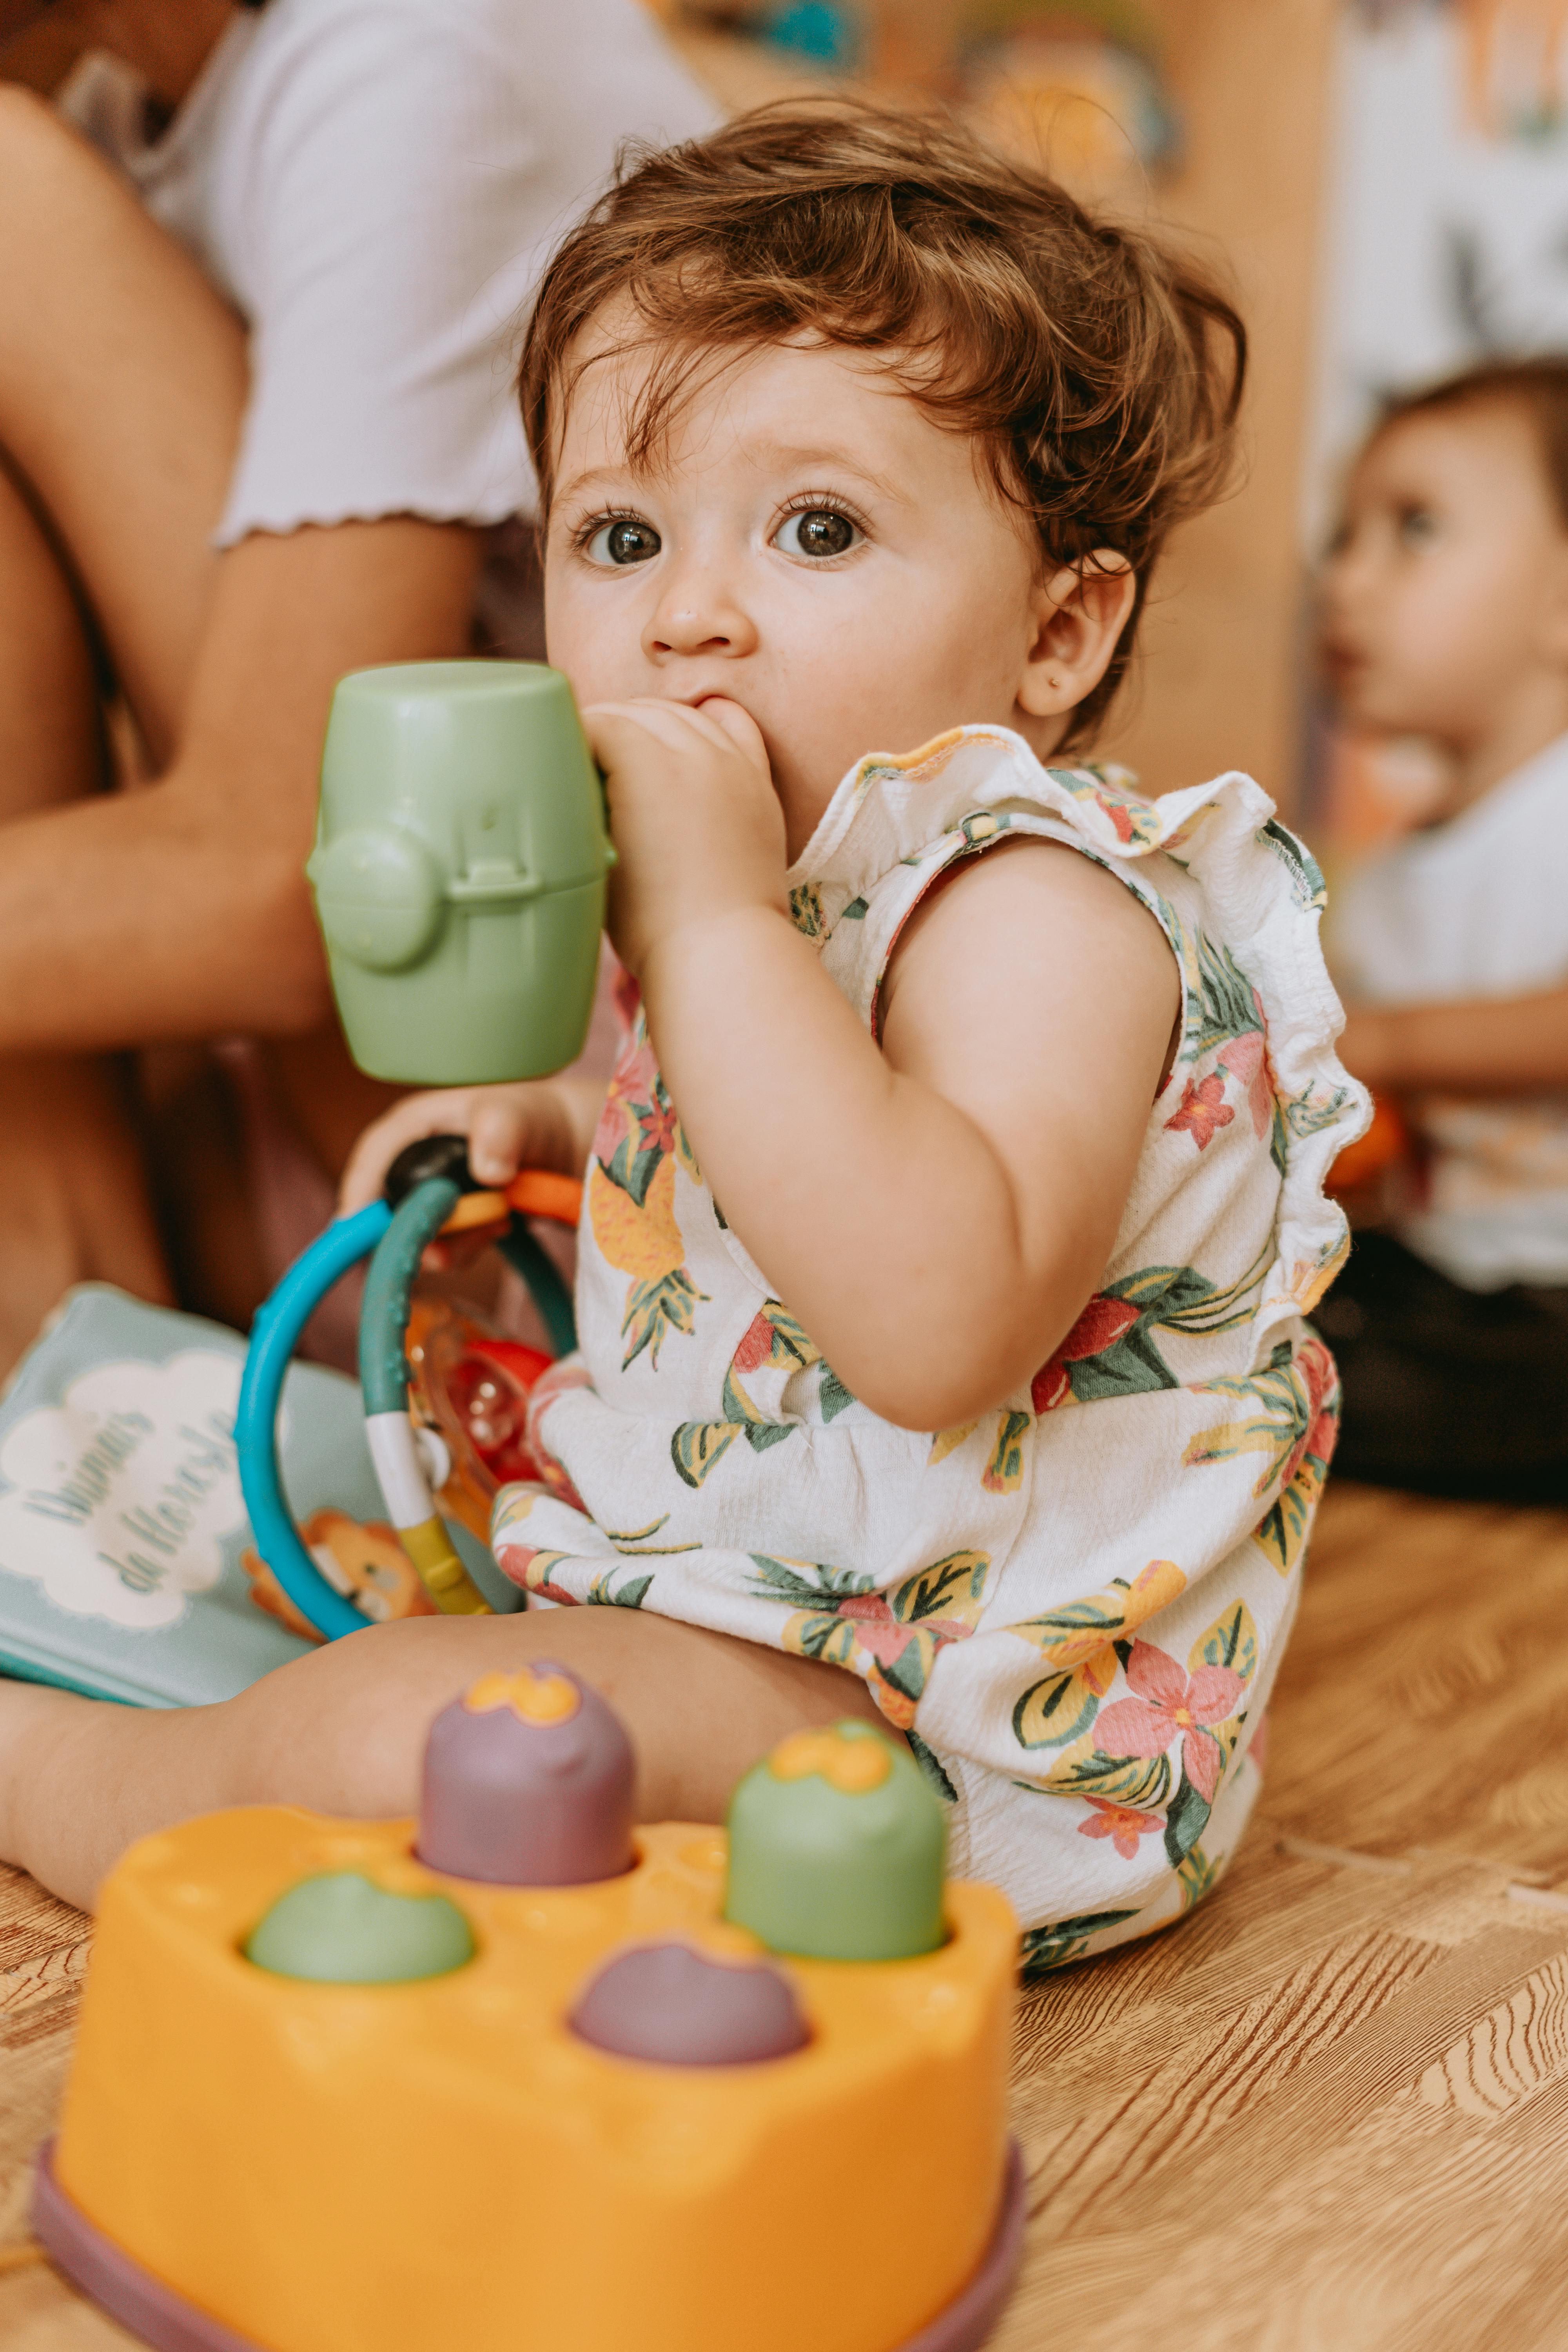 A baby playing with toys | Source: Pexels